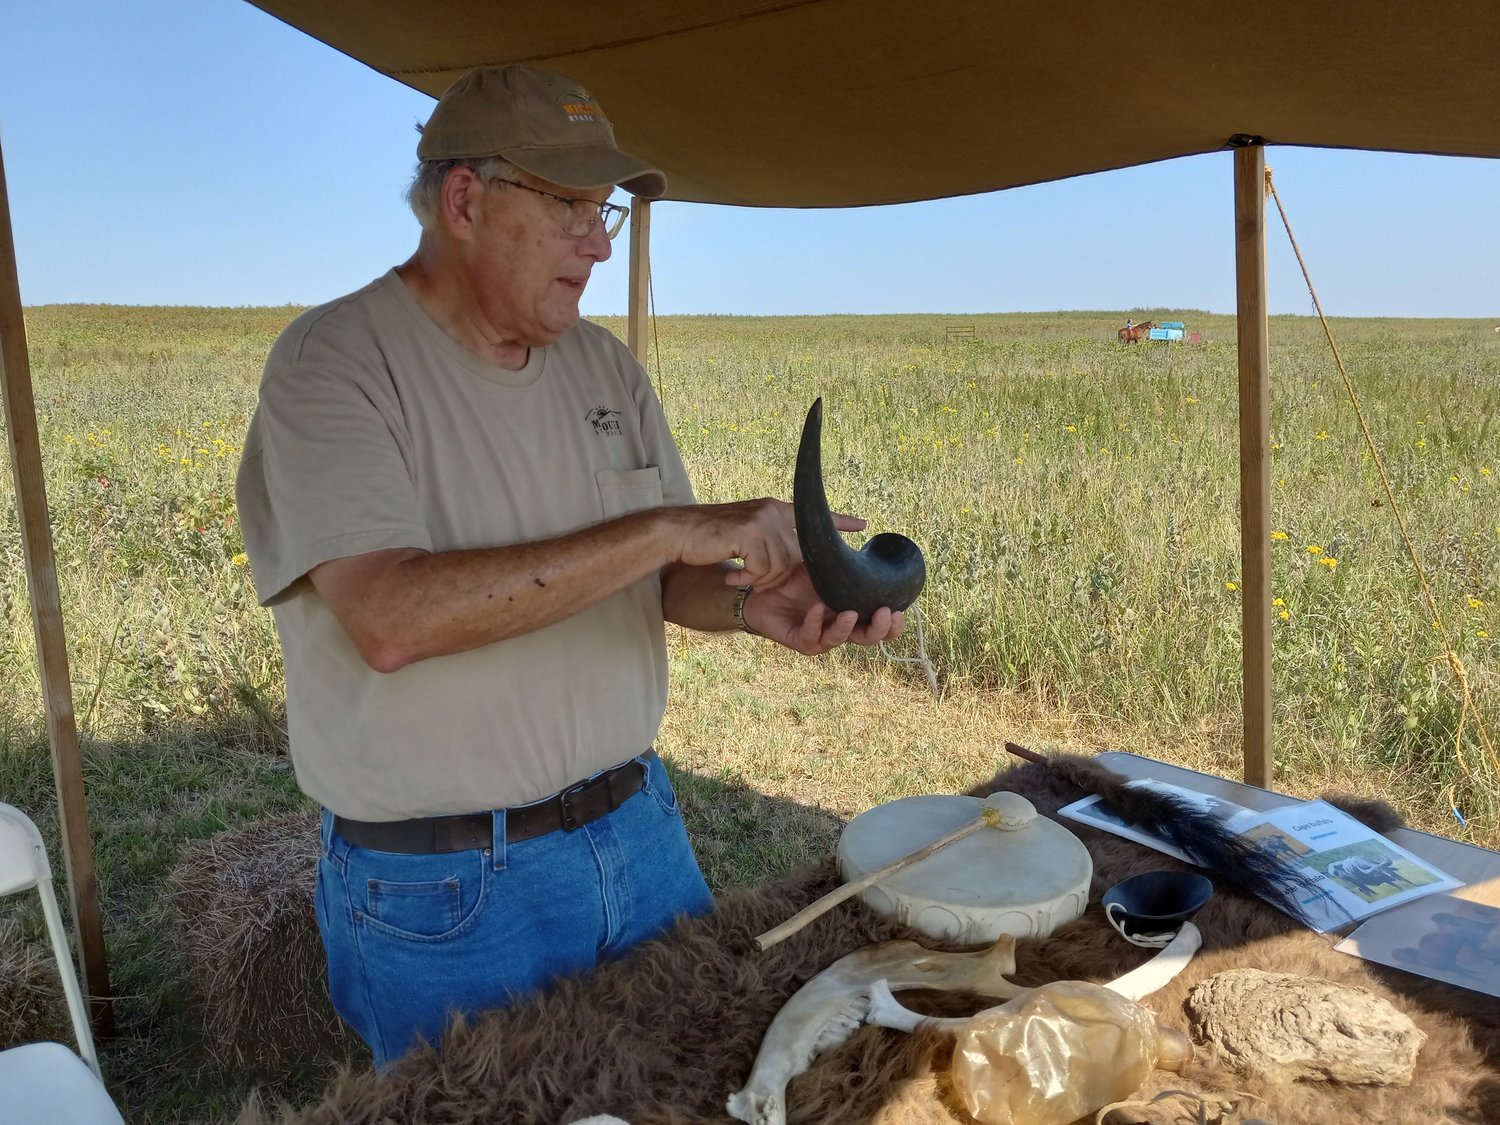 Galen Ewing, seasonal park naturalist, demonstrates how a bison horn can be used to hold gunpowder.